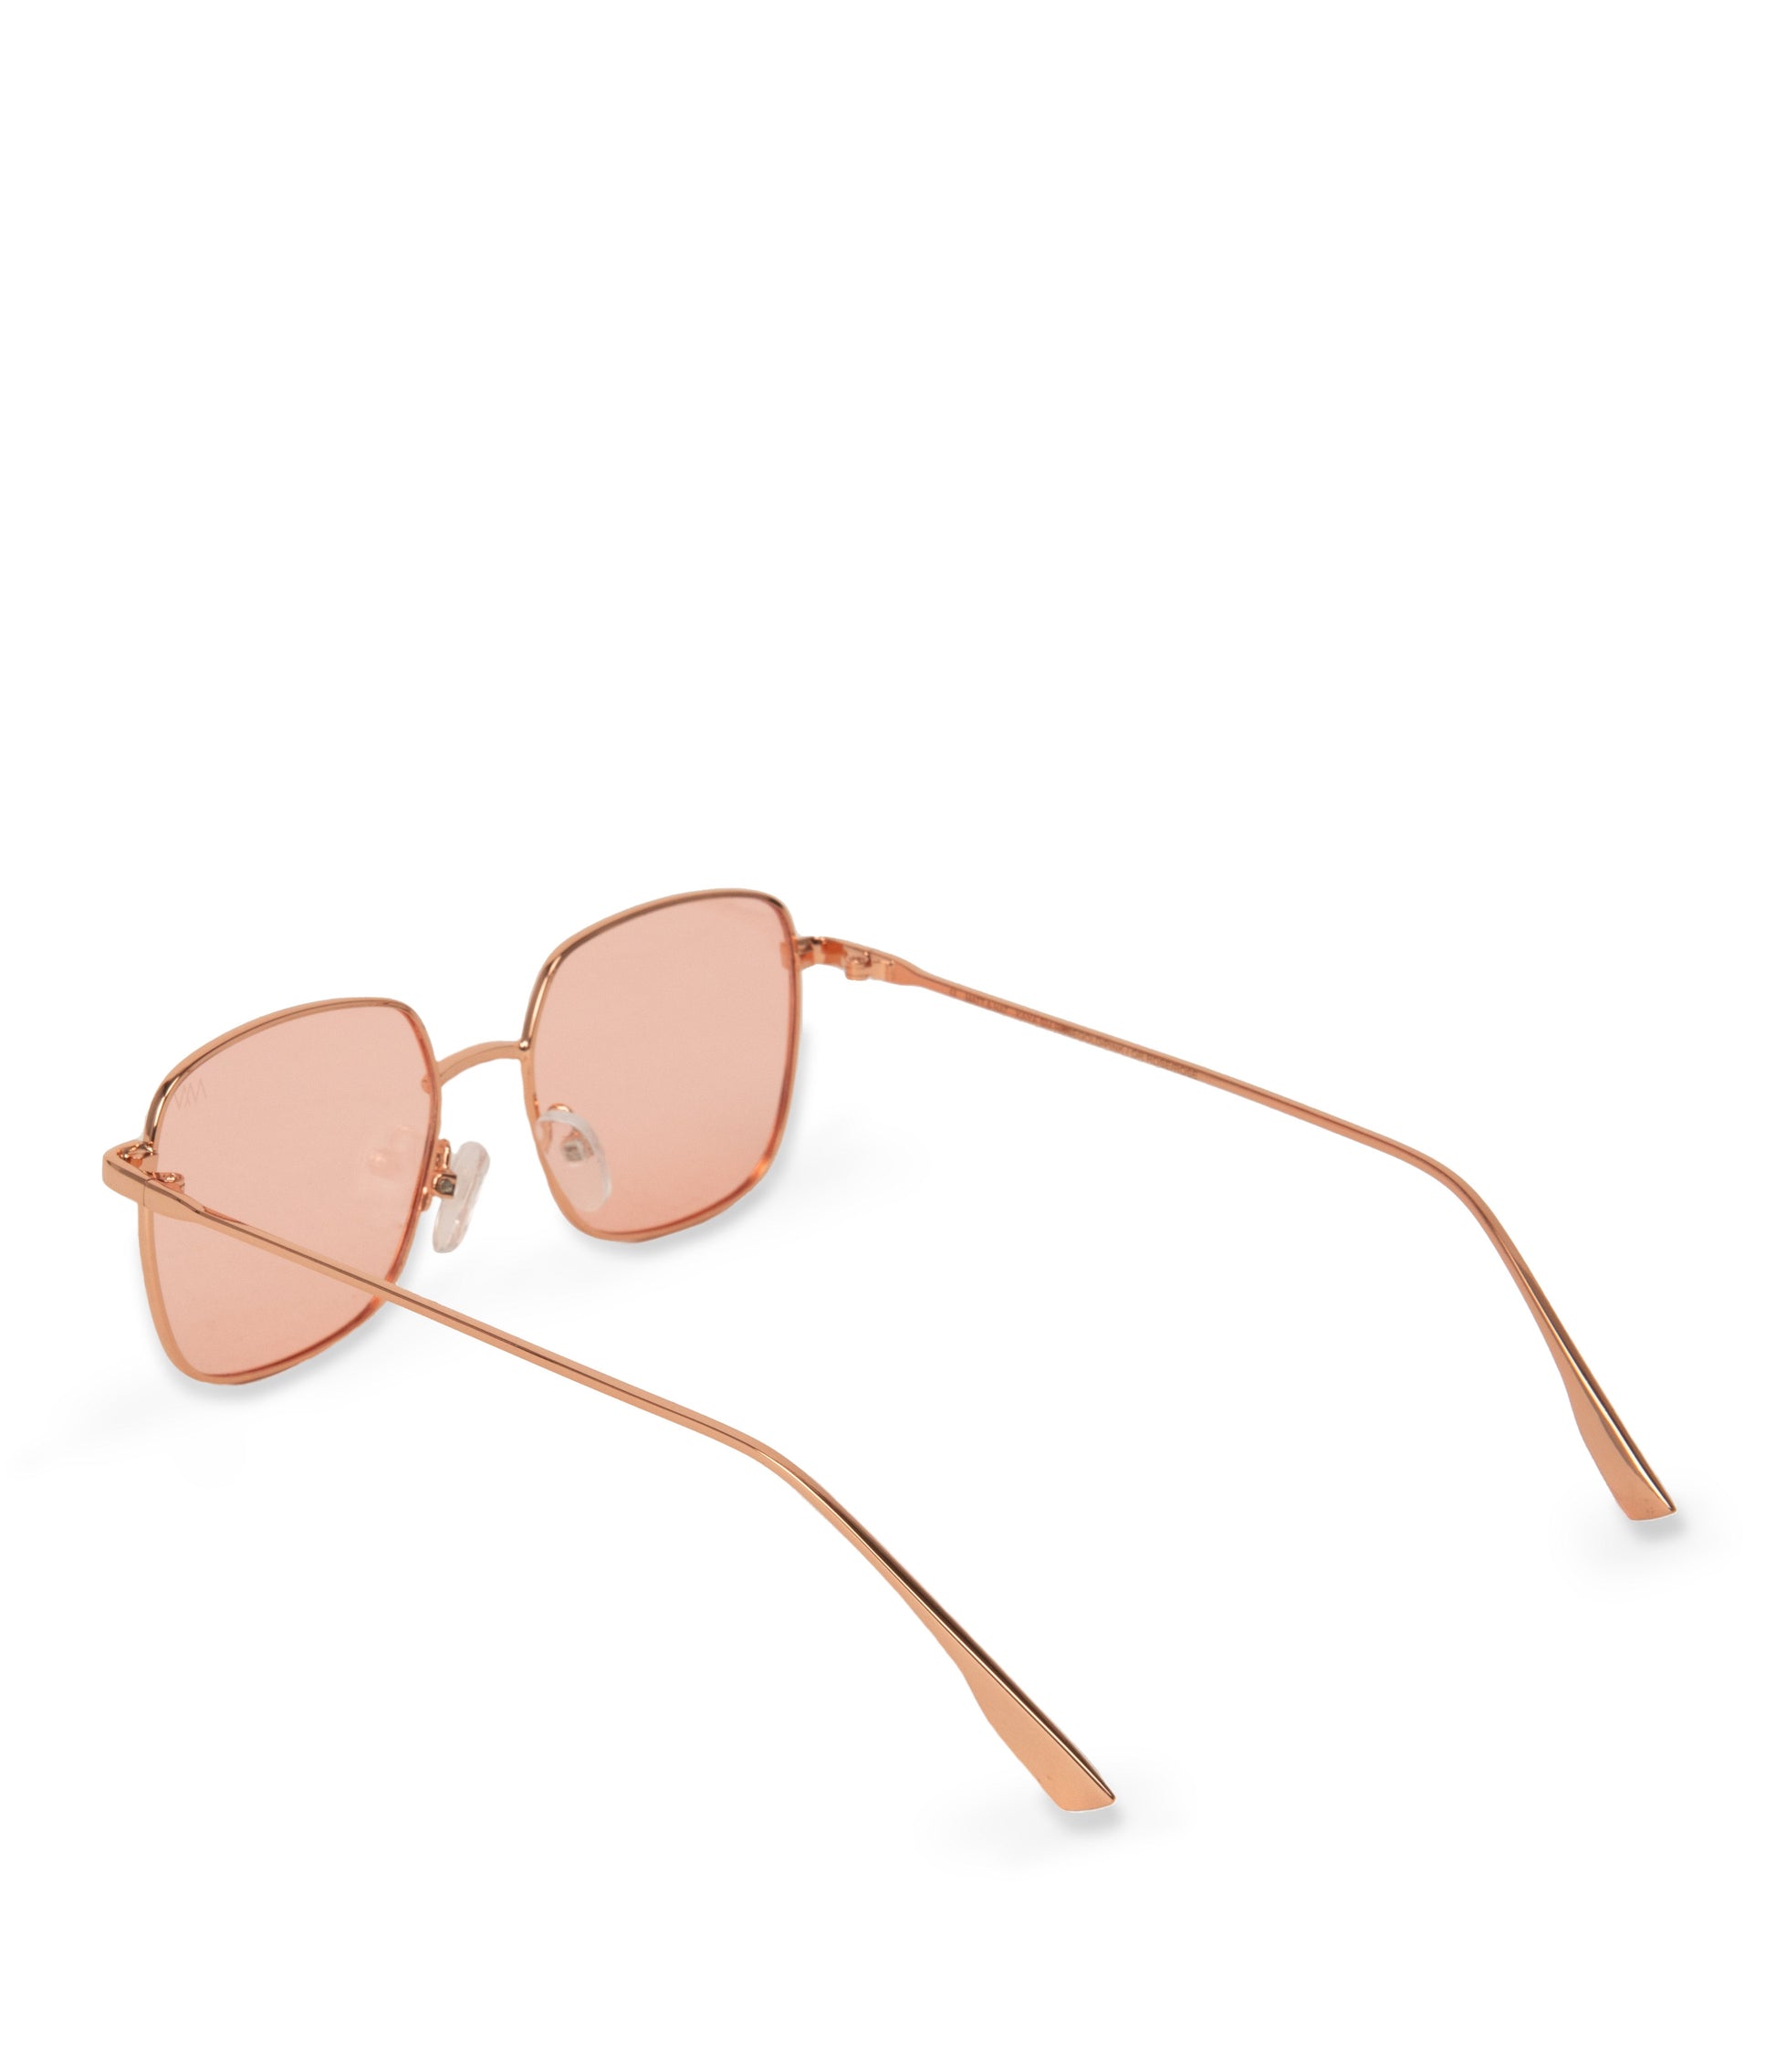 KAYASM Small Square Sunglasses | Color: Pink - variant::rosego